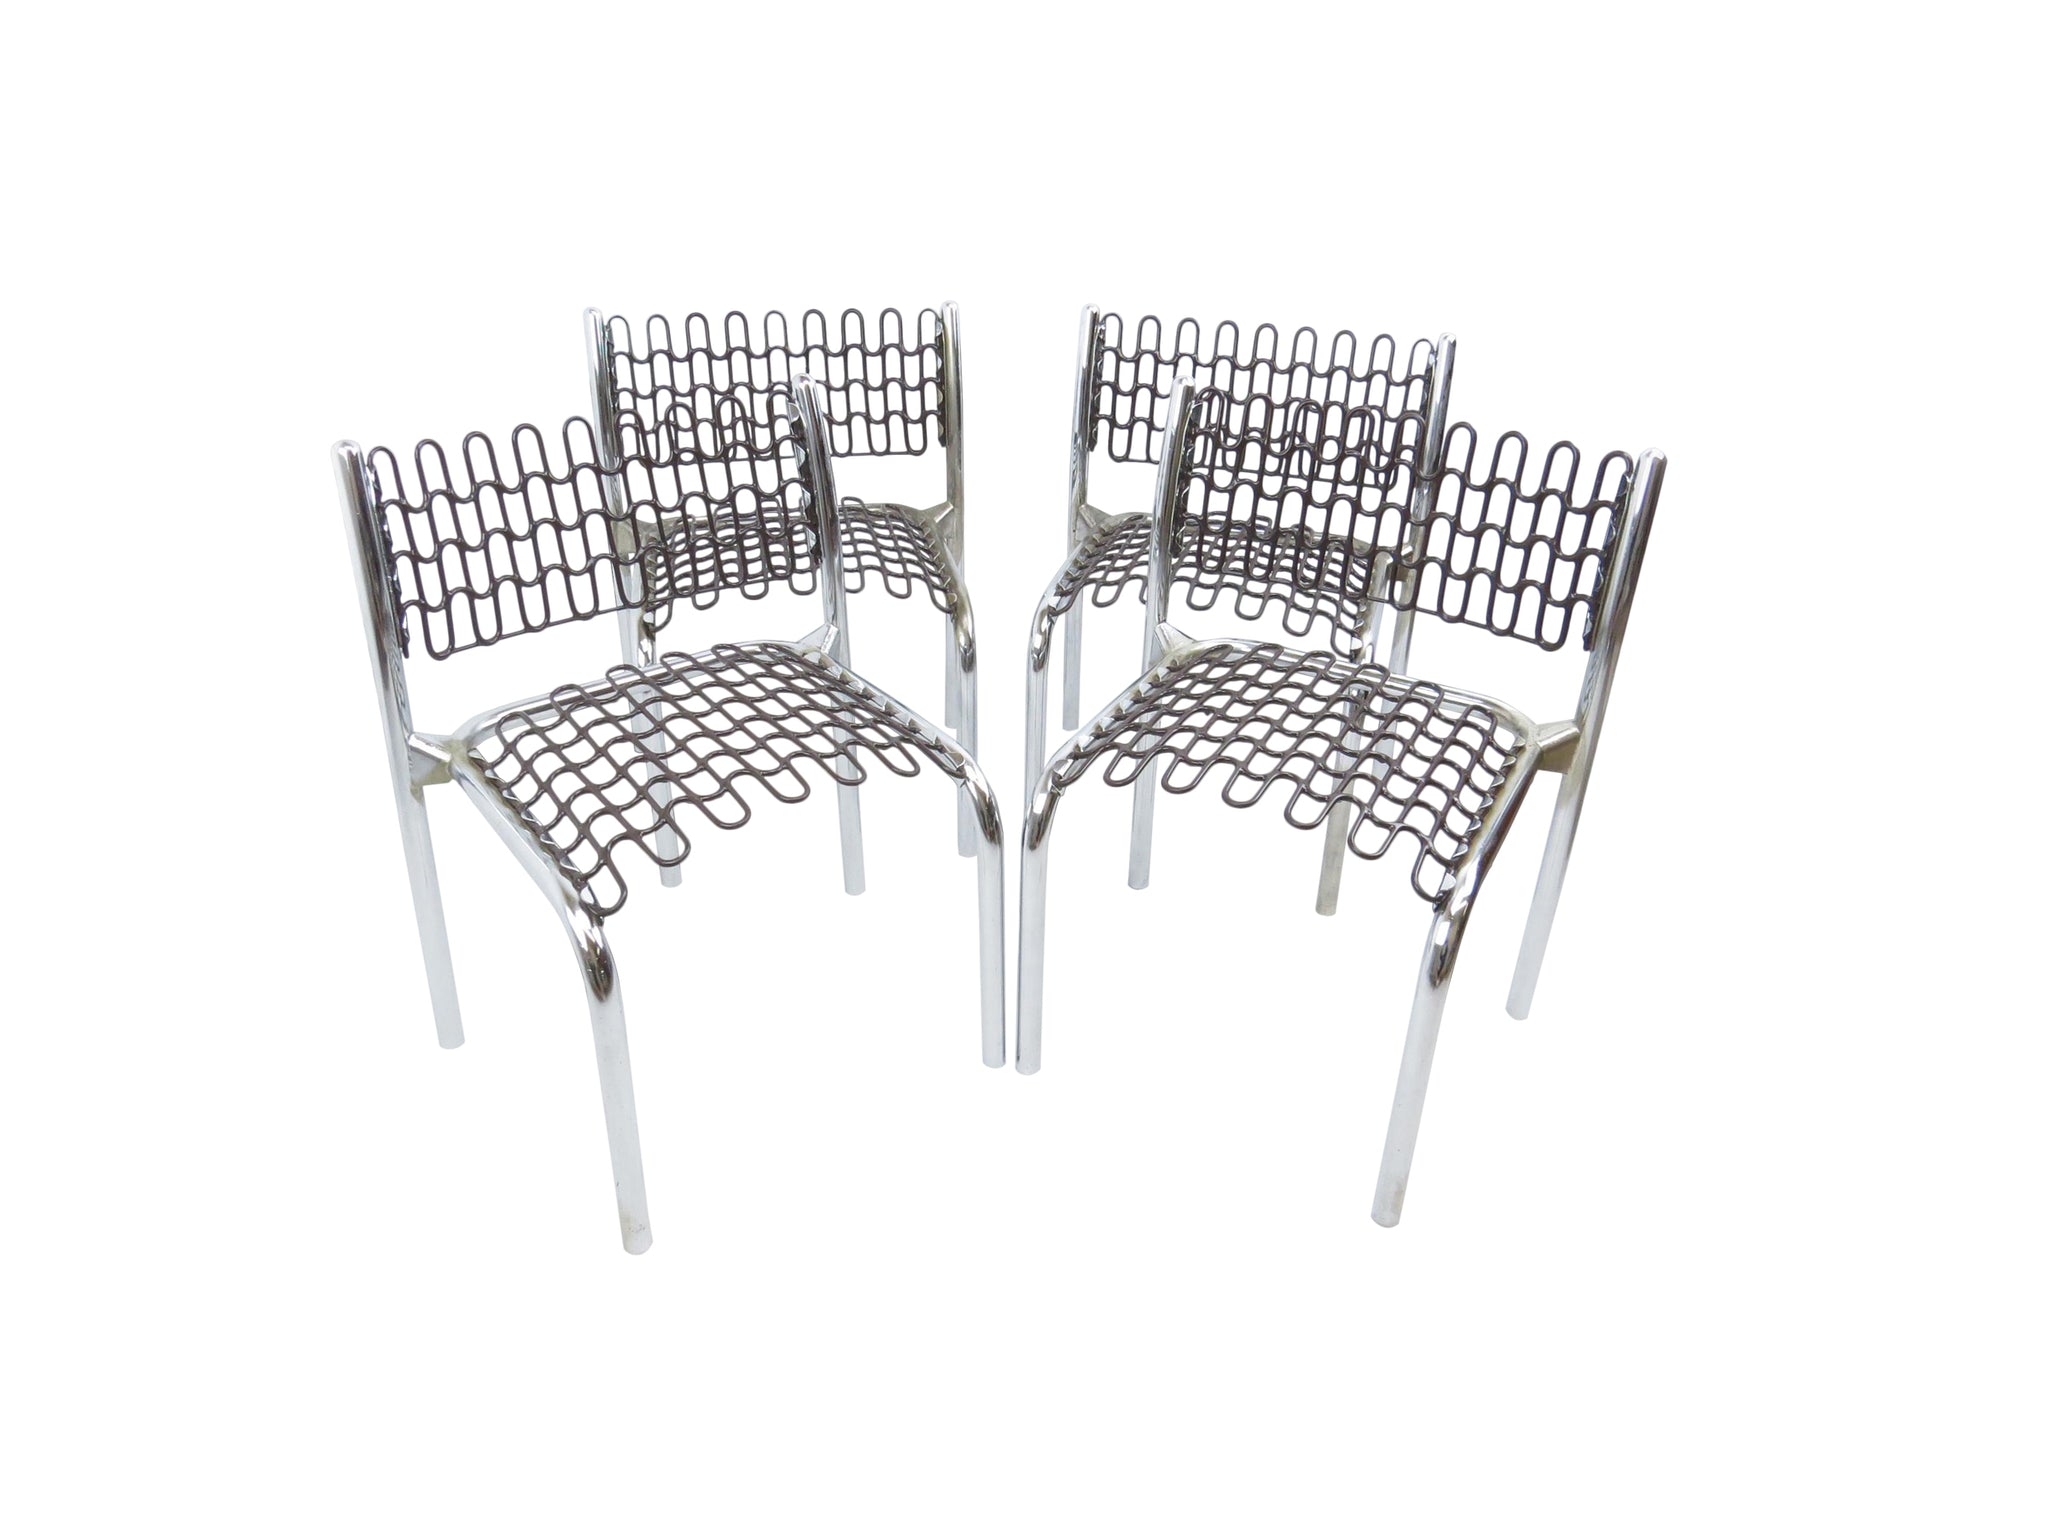 edgebrookhouse - 1970s David Rowland for Thonet Patented Softec Chair & Soflex Mesh Children's Chairs - Set of 4